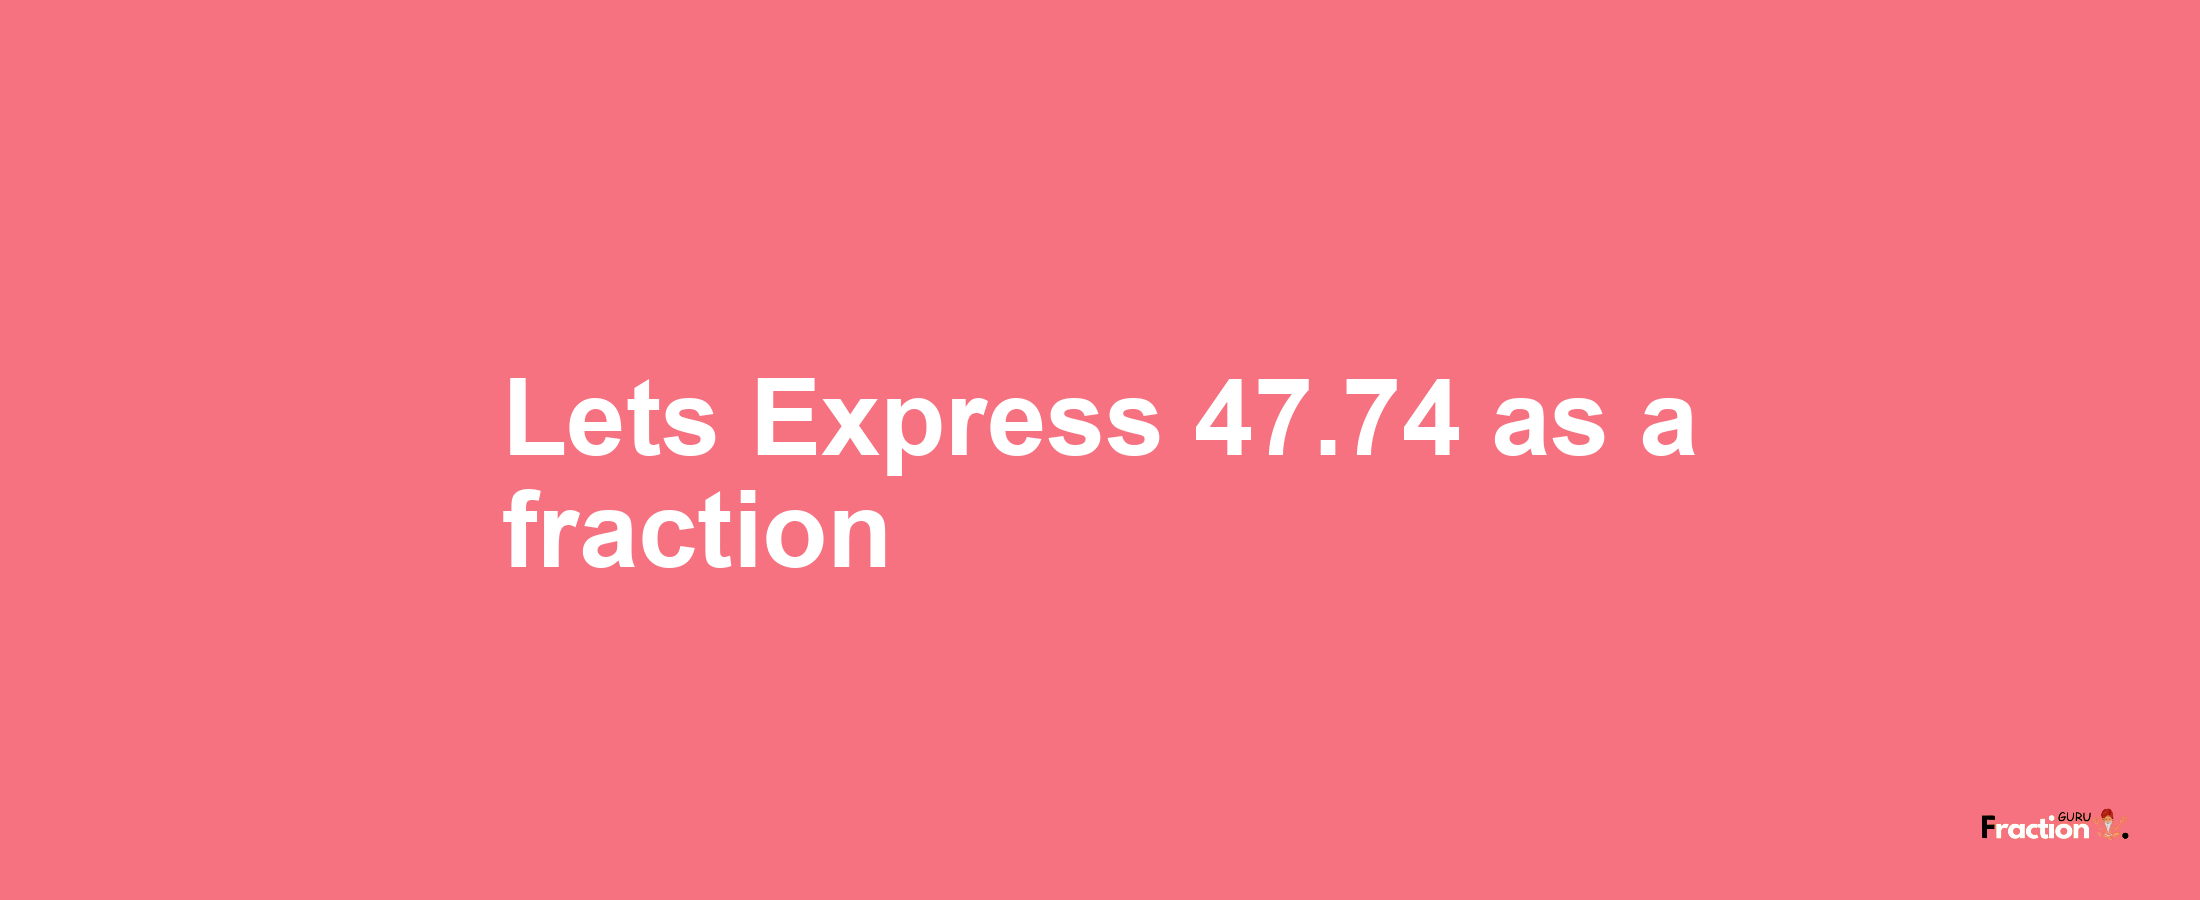 Lets Express 47.74 as afraction